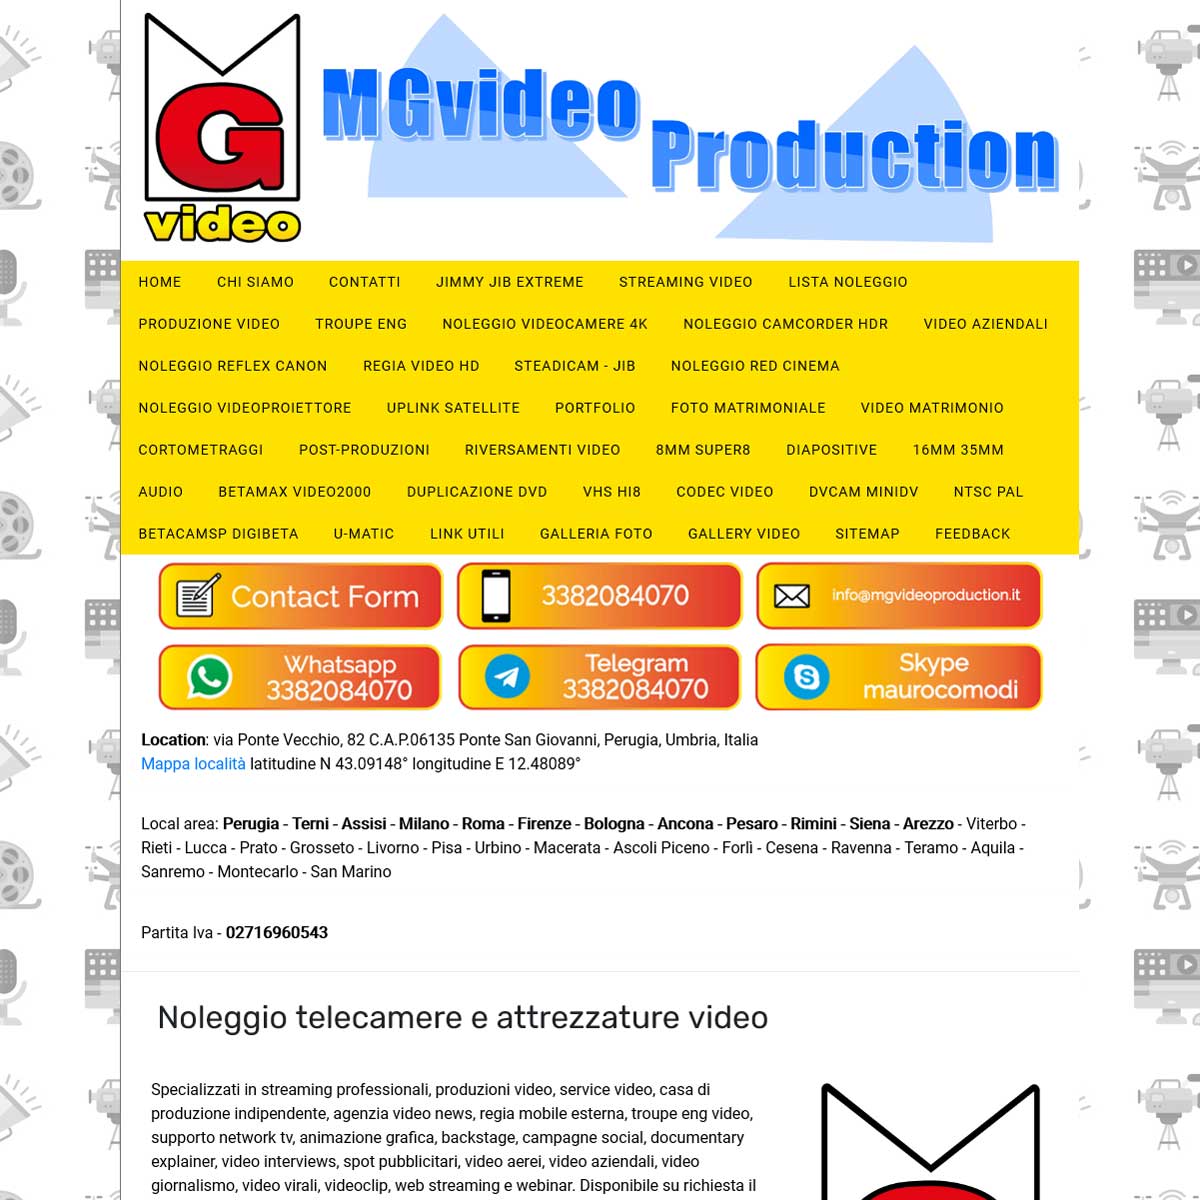 Mgvideoproduction produzioni video